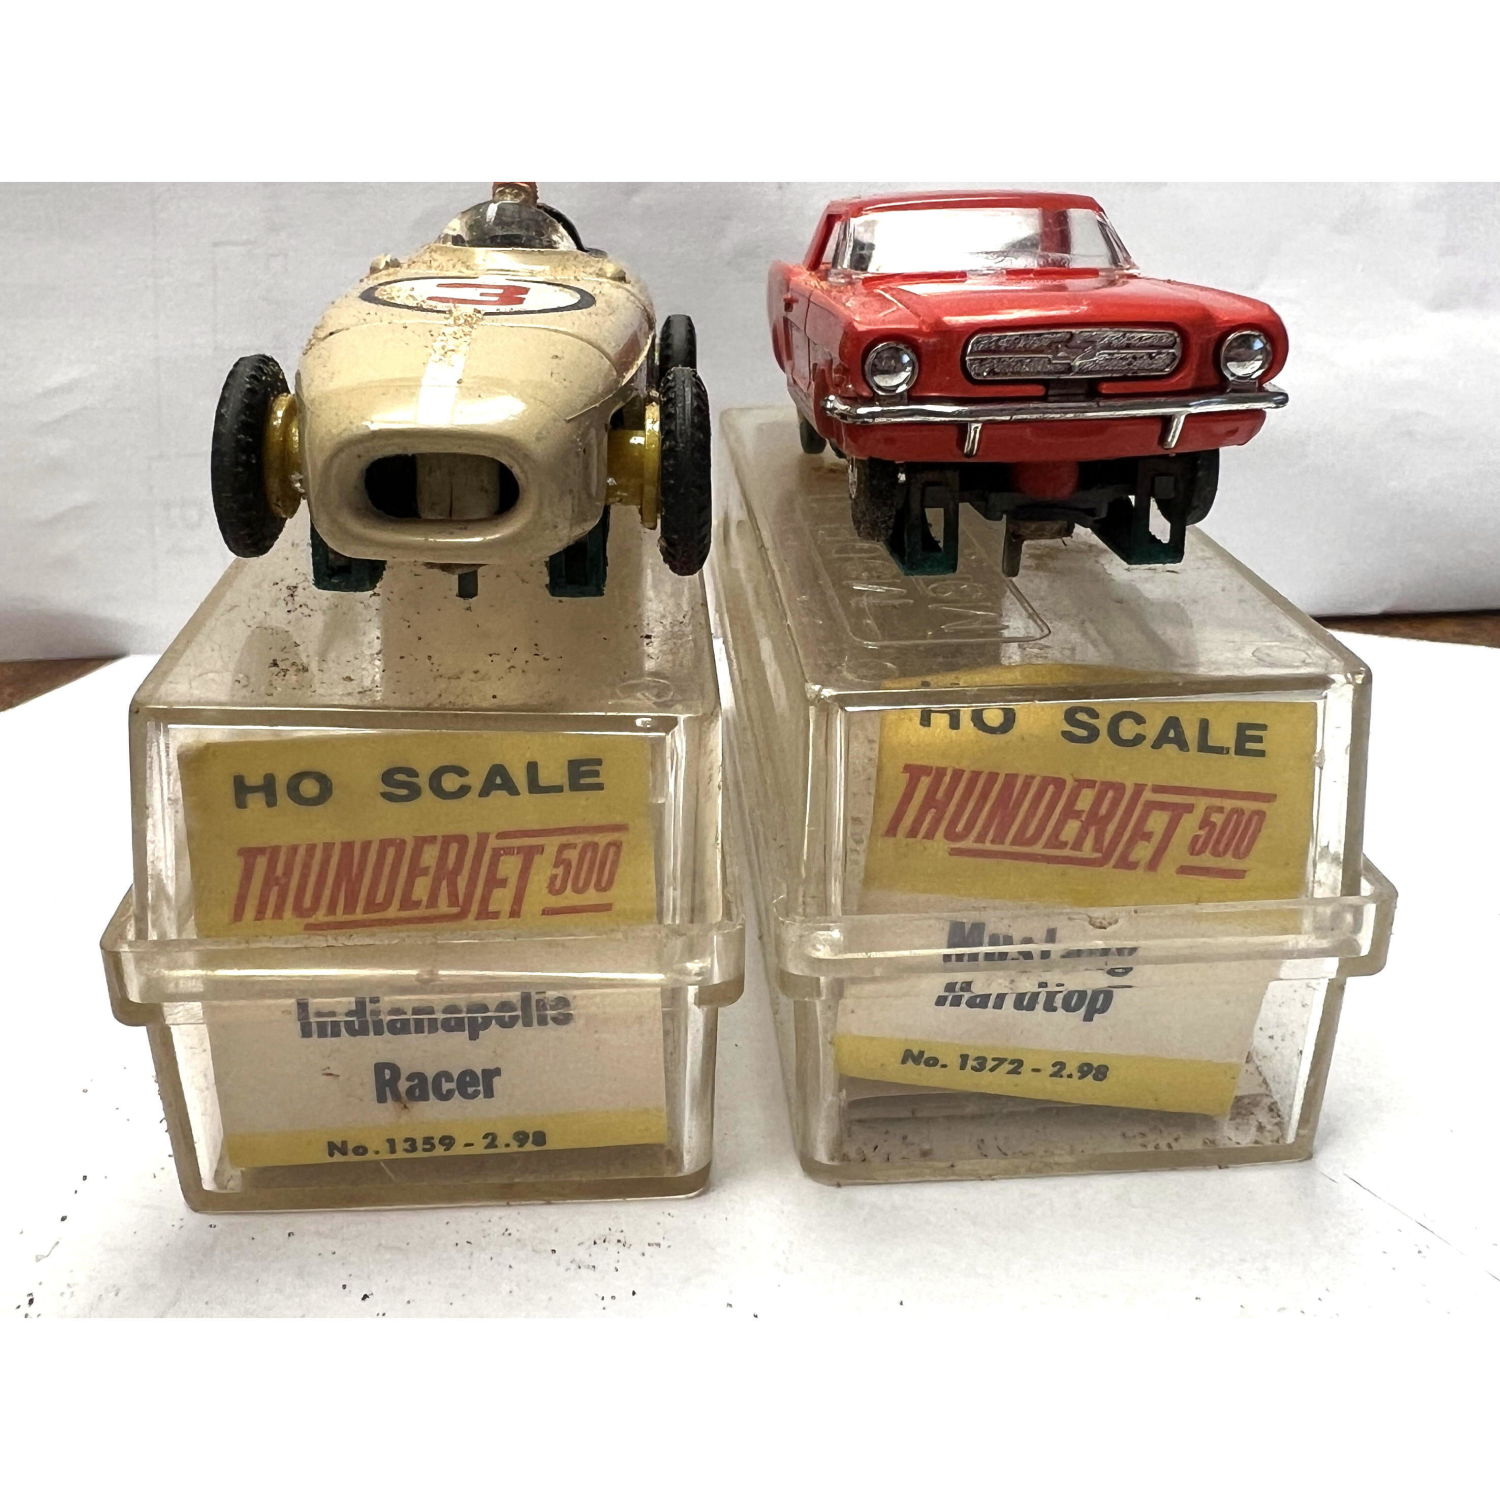 2 slot cars 1359 Indianapolis racer.